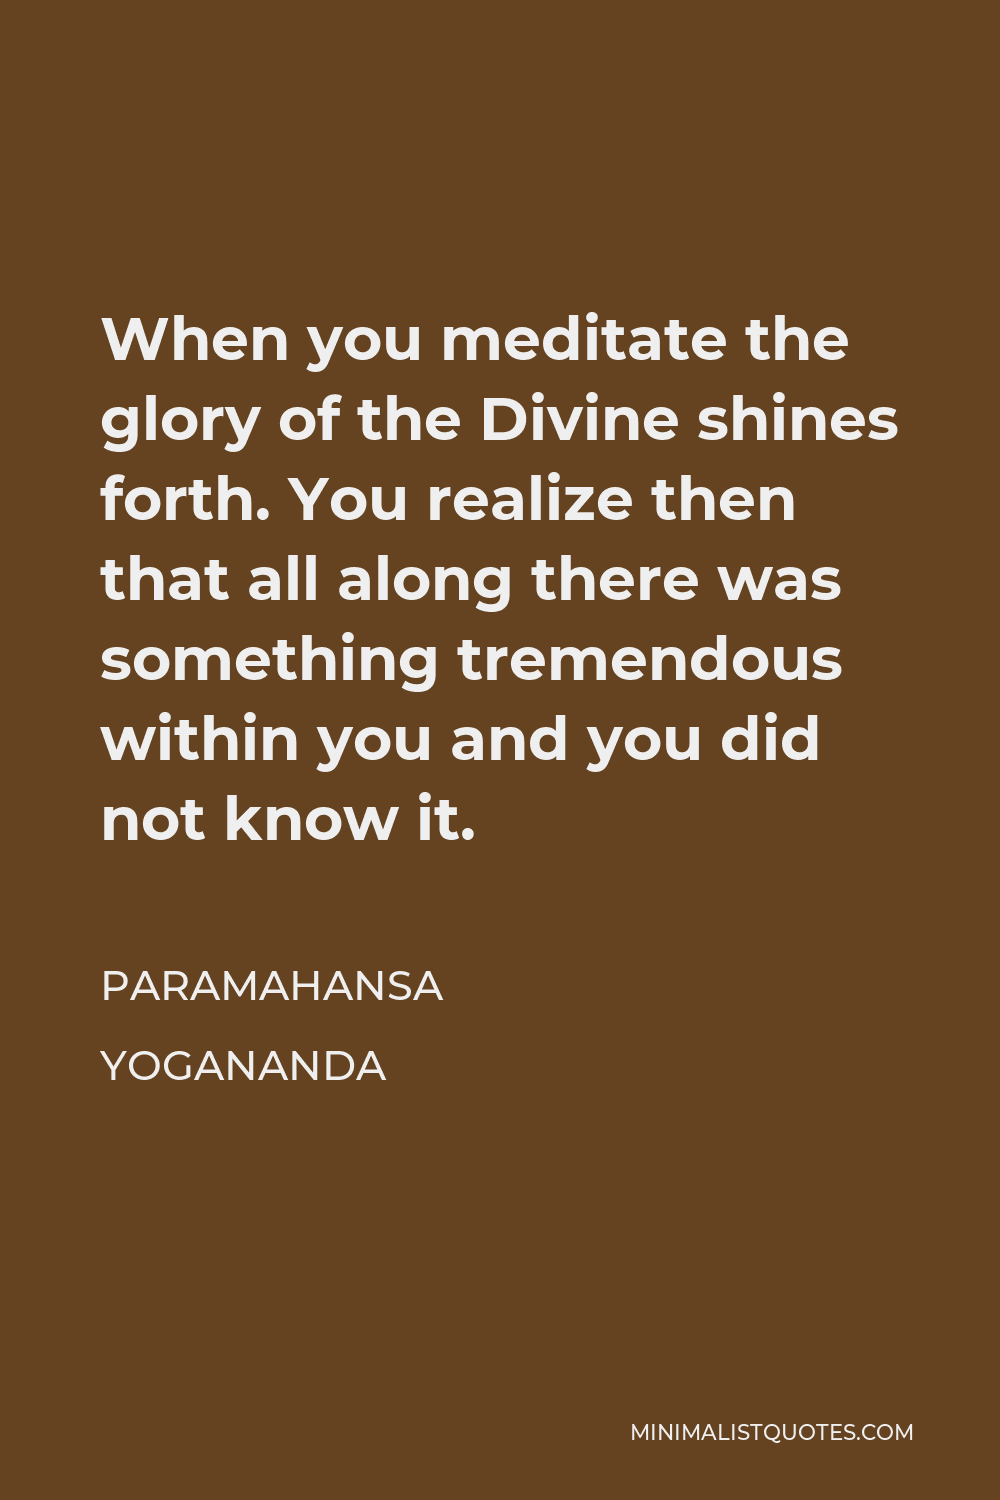 Paramahansa Yogananda Quote - When you meditate the glory of the Divine shines forth. You realize then that all along there was something tremendous within you and you did not know it.